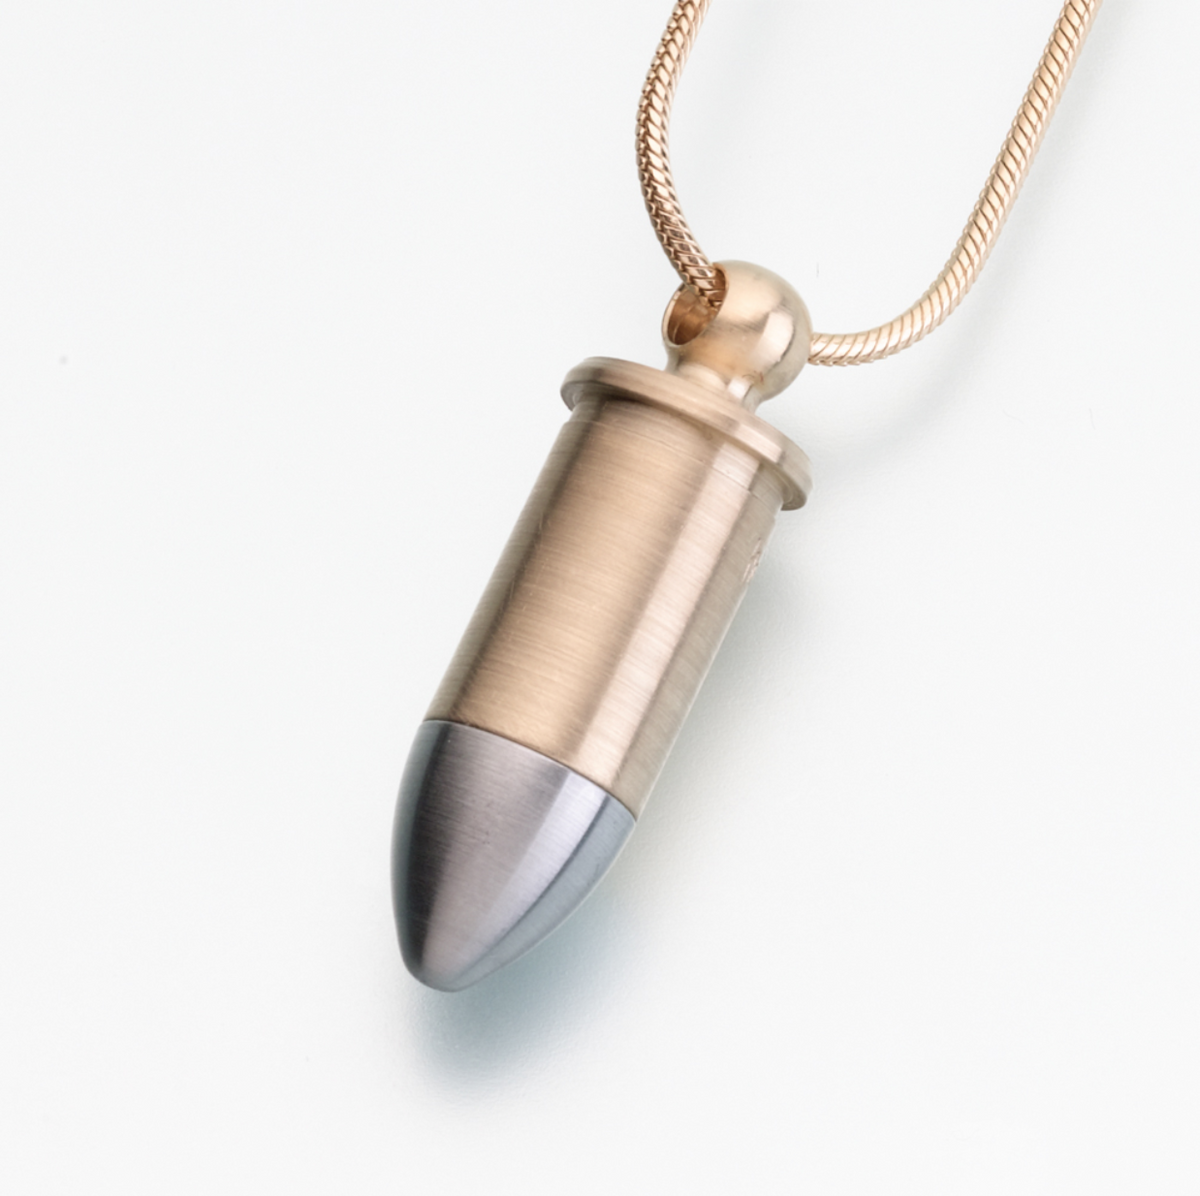 Mens Gold Stainless Steel Bullet Pendant Necklace